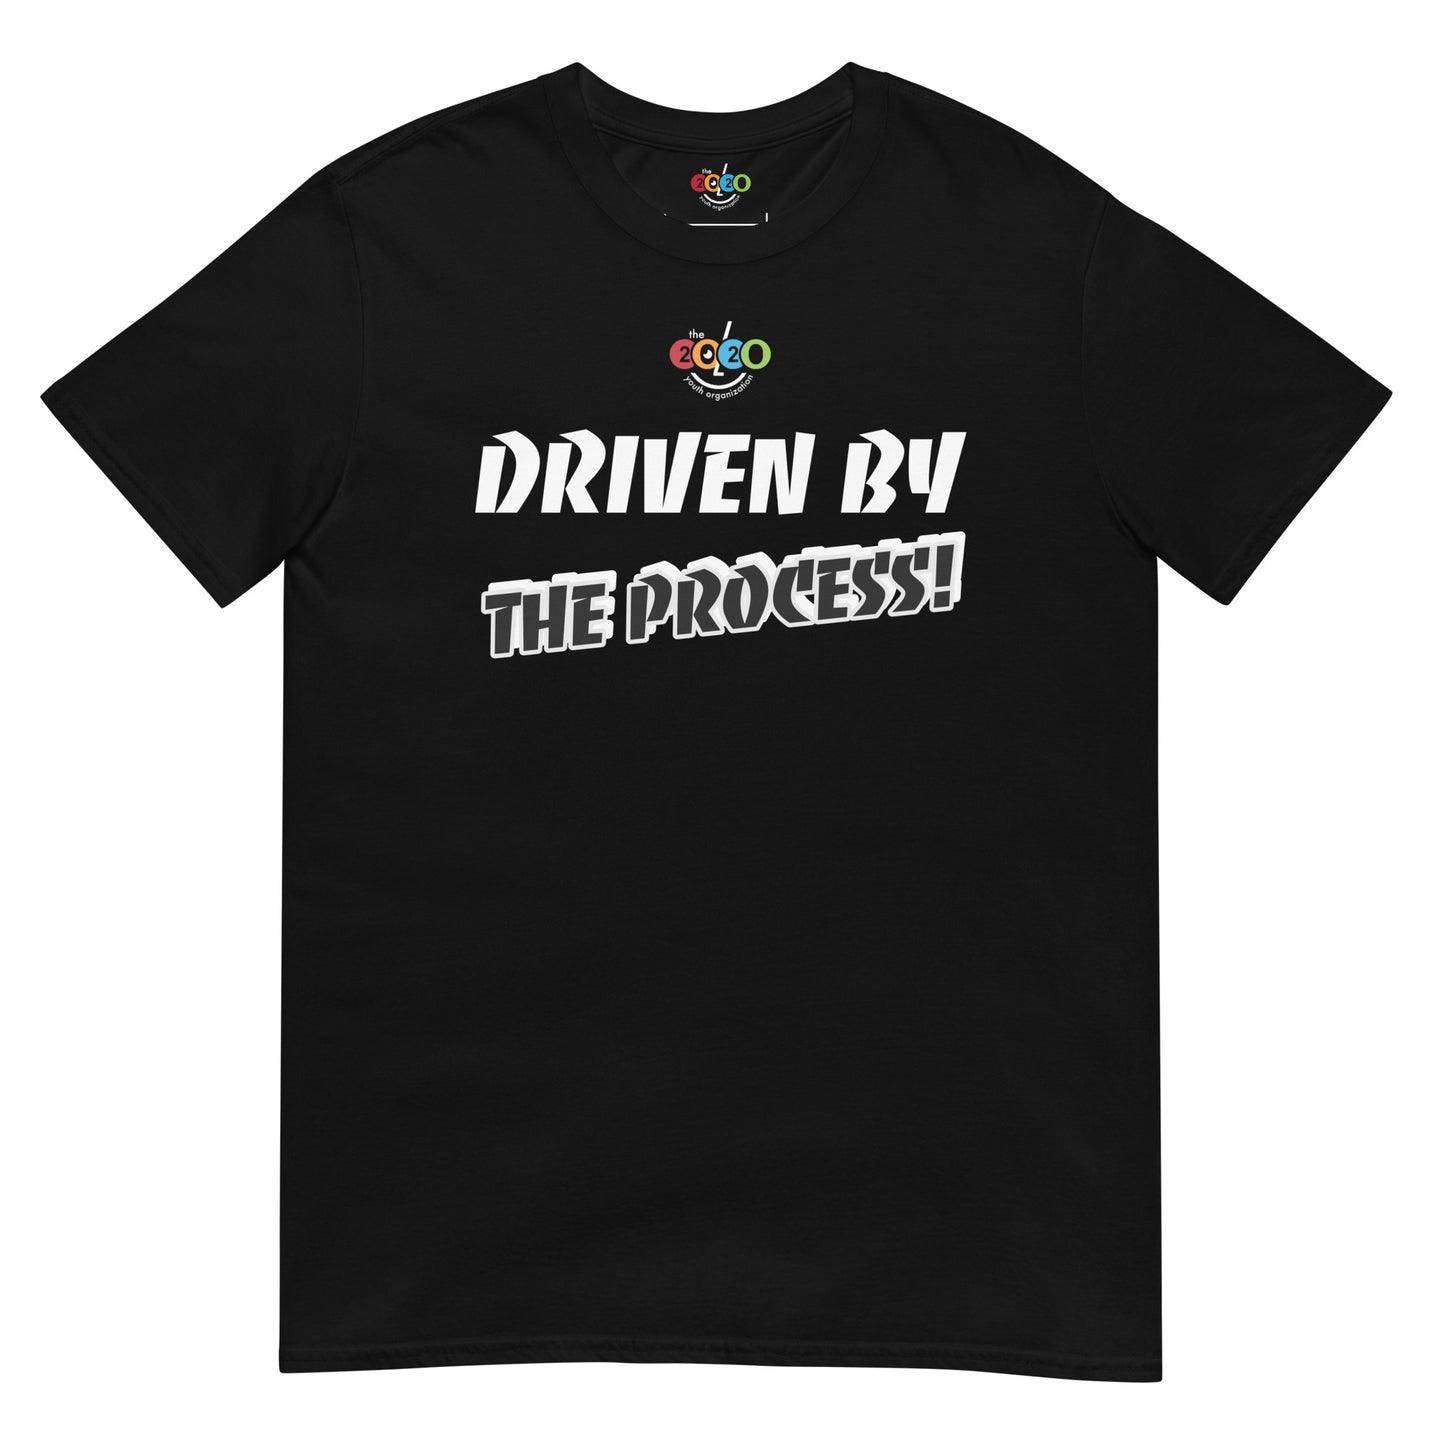 Driven By The Process Short-Sleeve T-Shirt